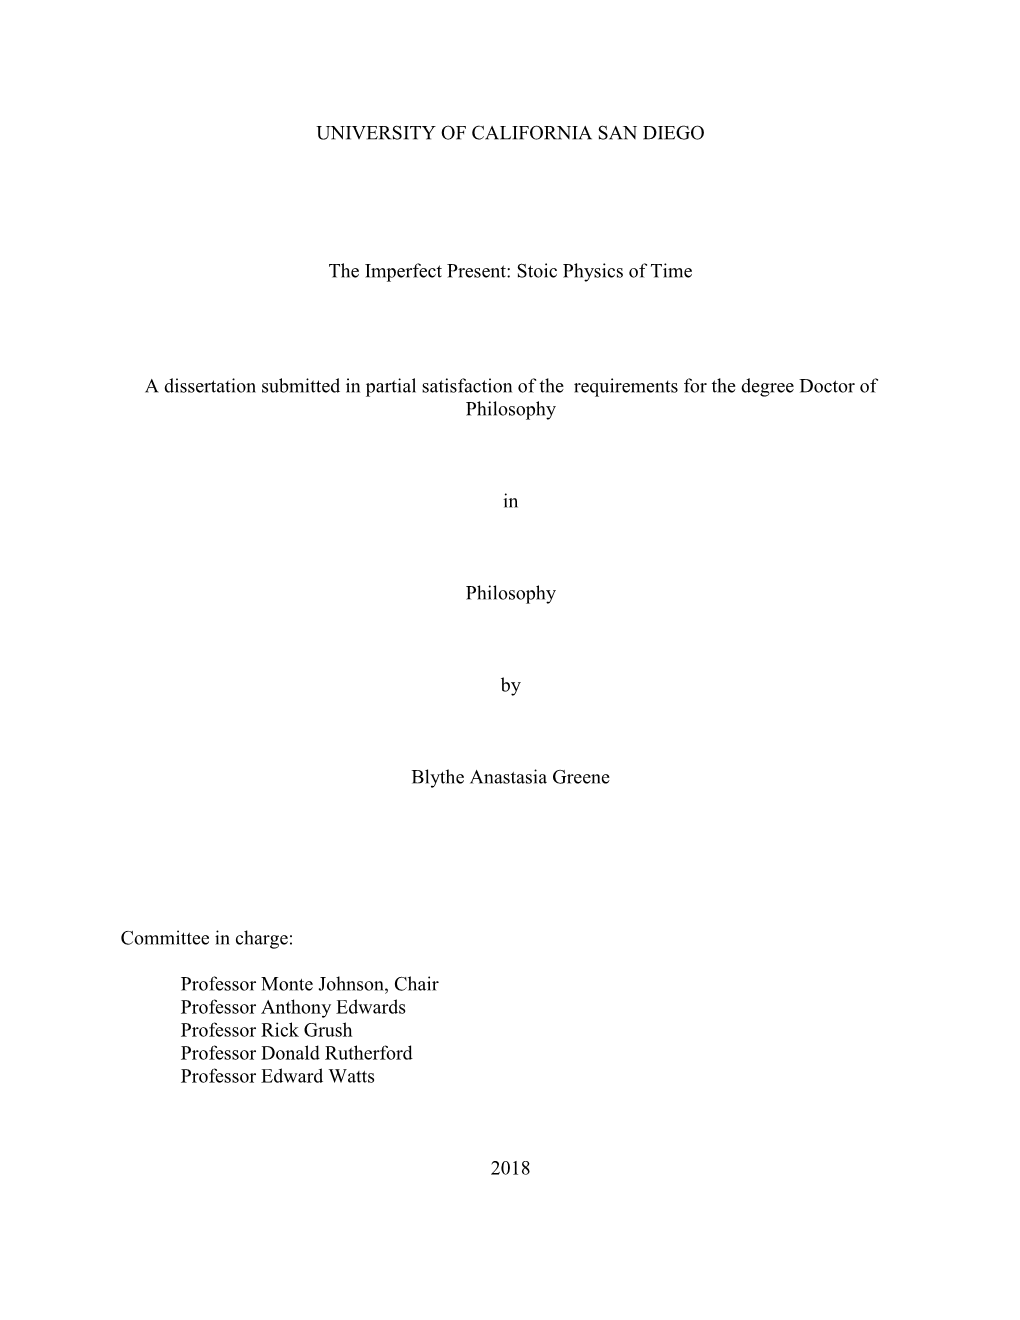 Stoic Physics of Time a Dissertation Submitted in Partial